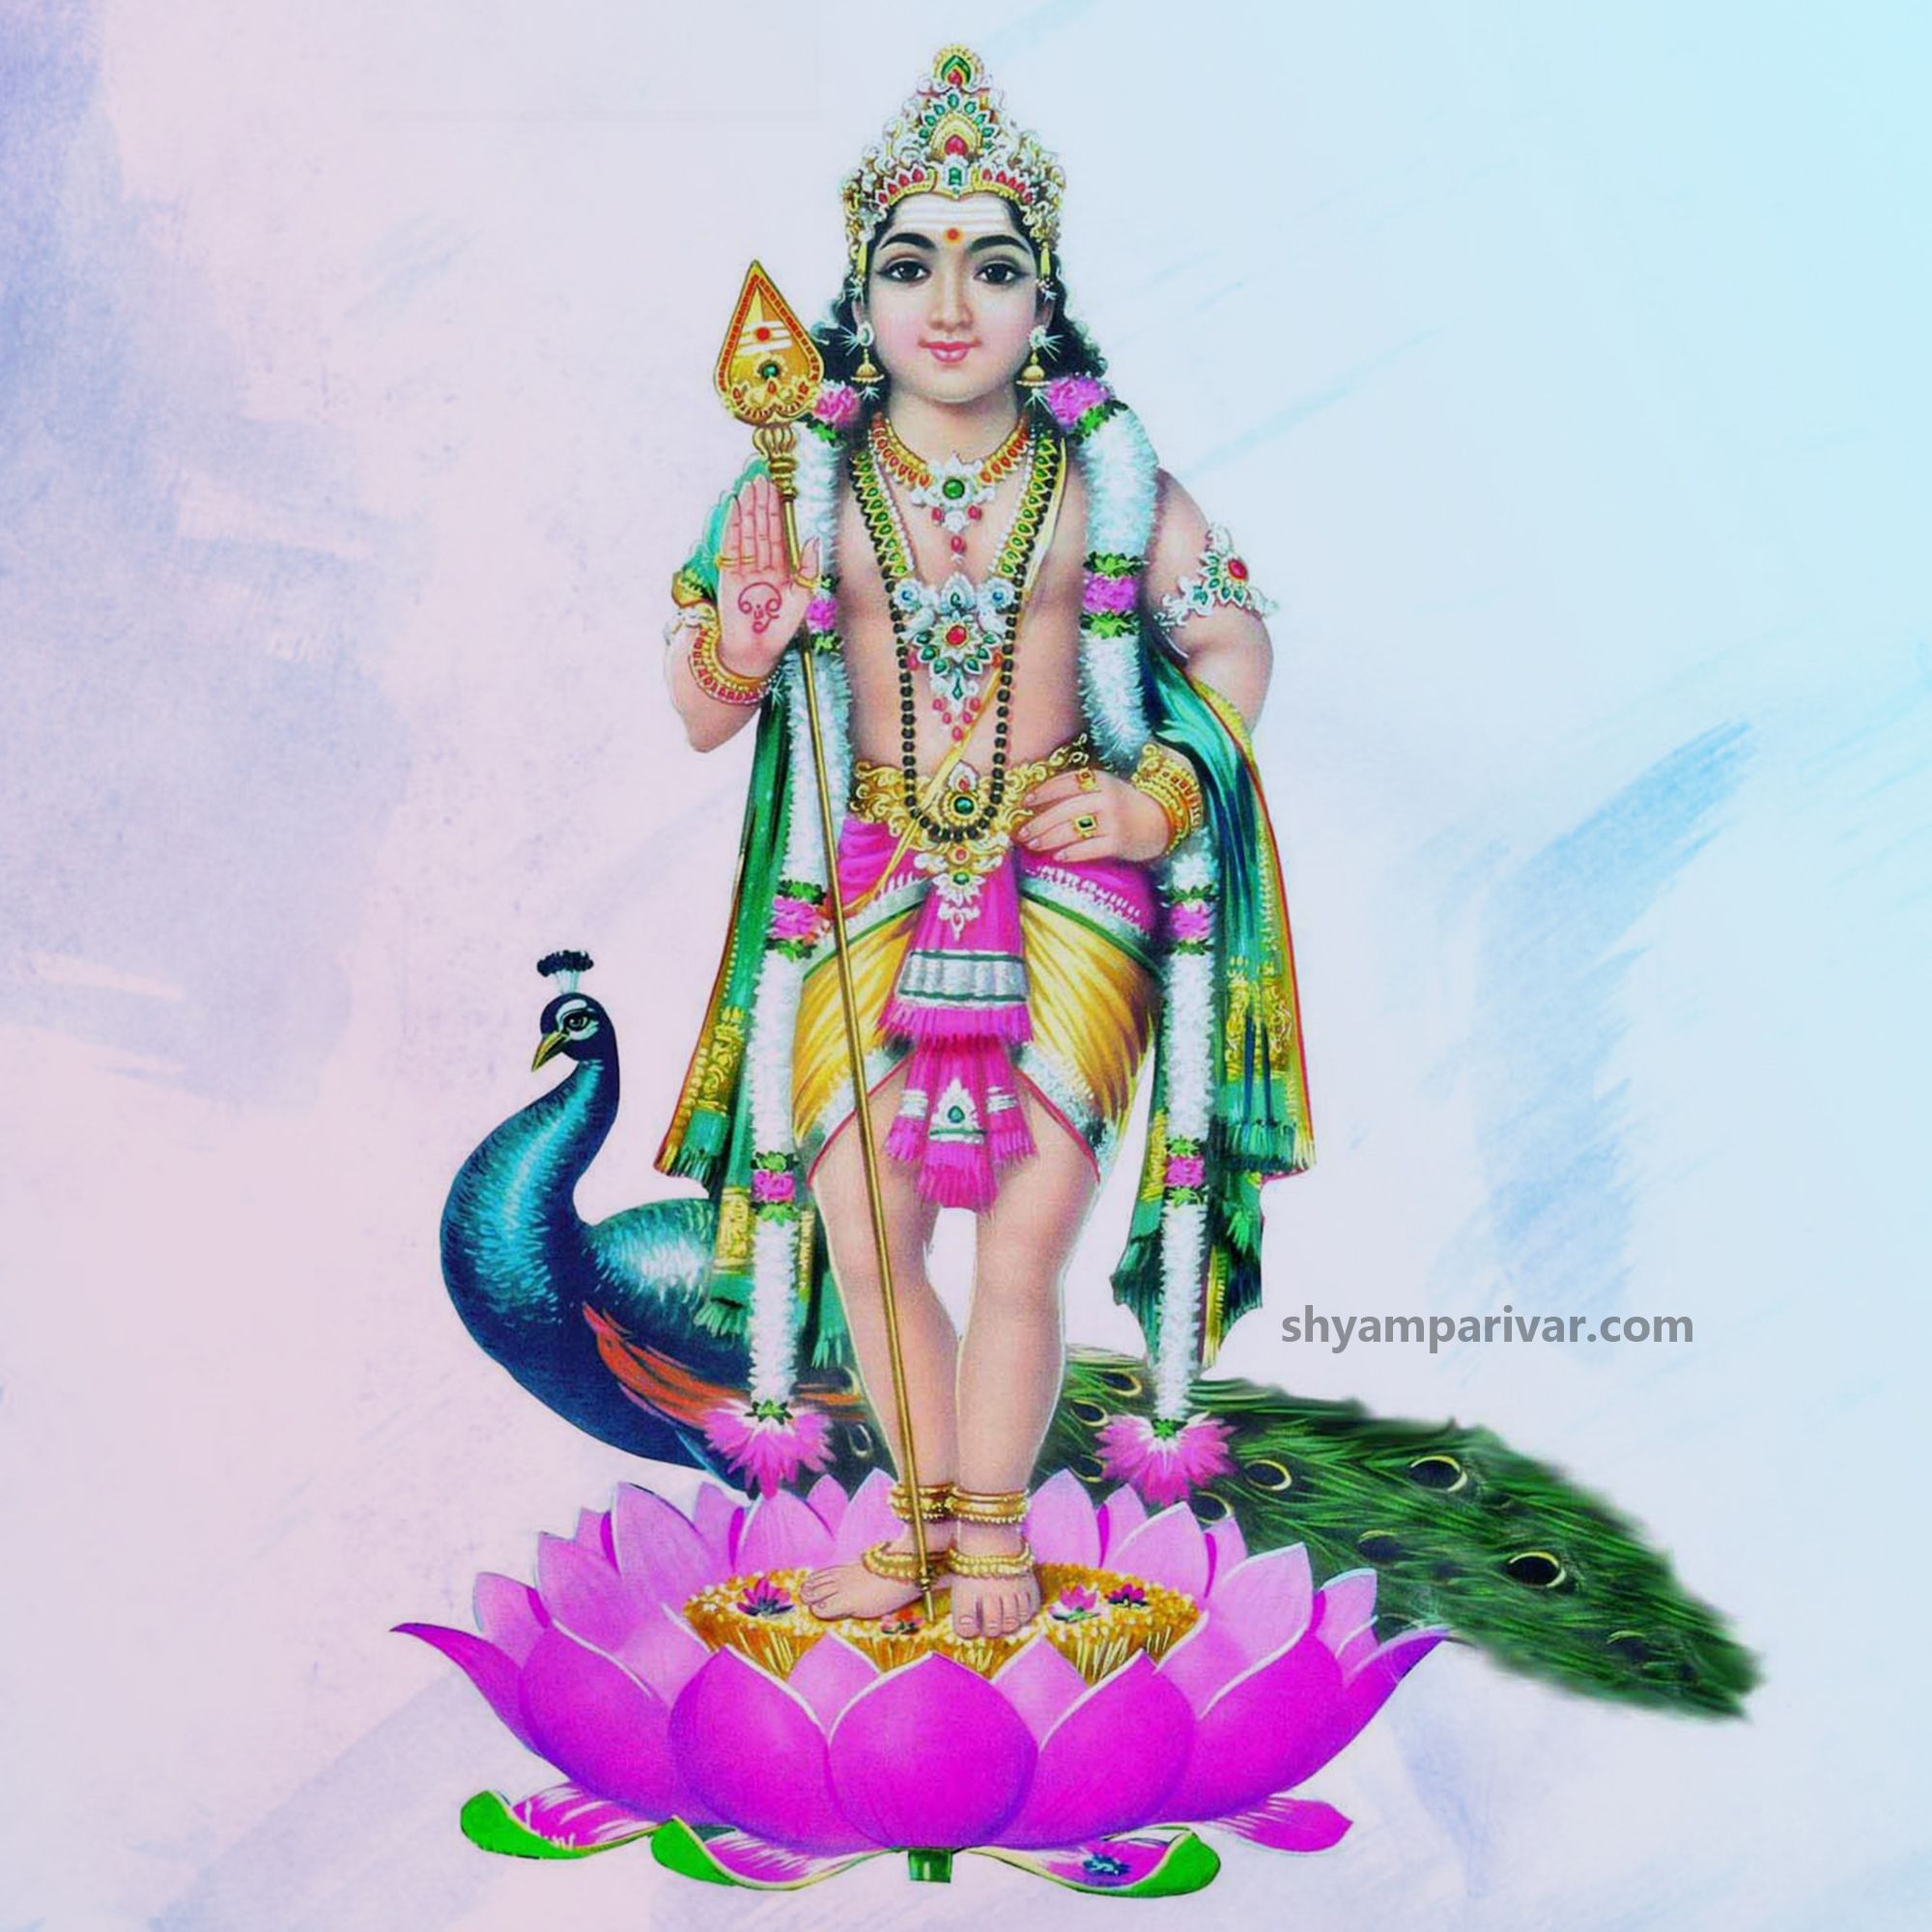 Lord murugan HD image wallpaper, picture, quotes, image